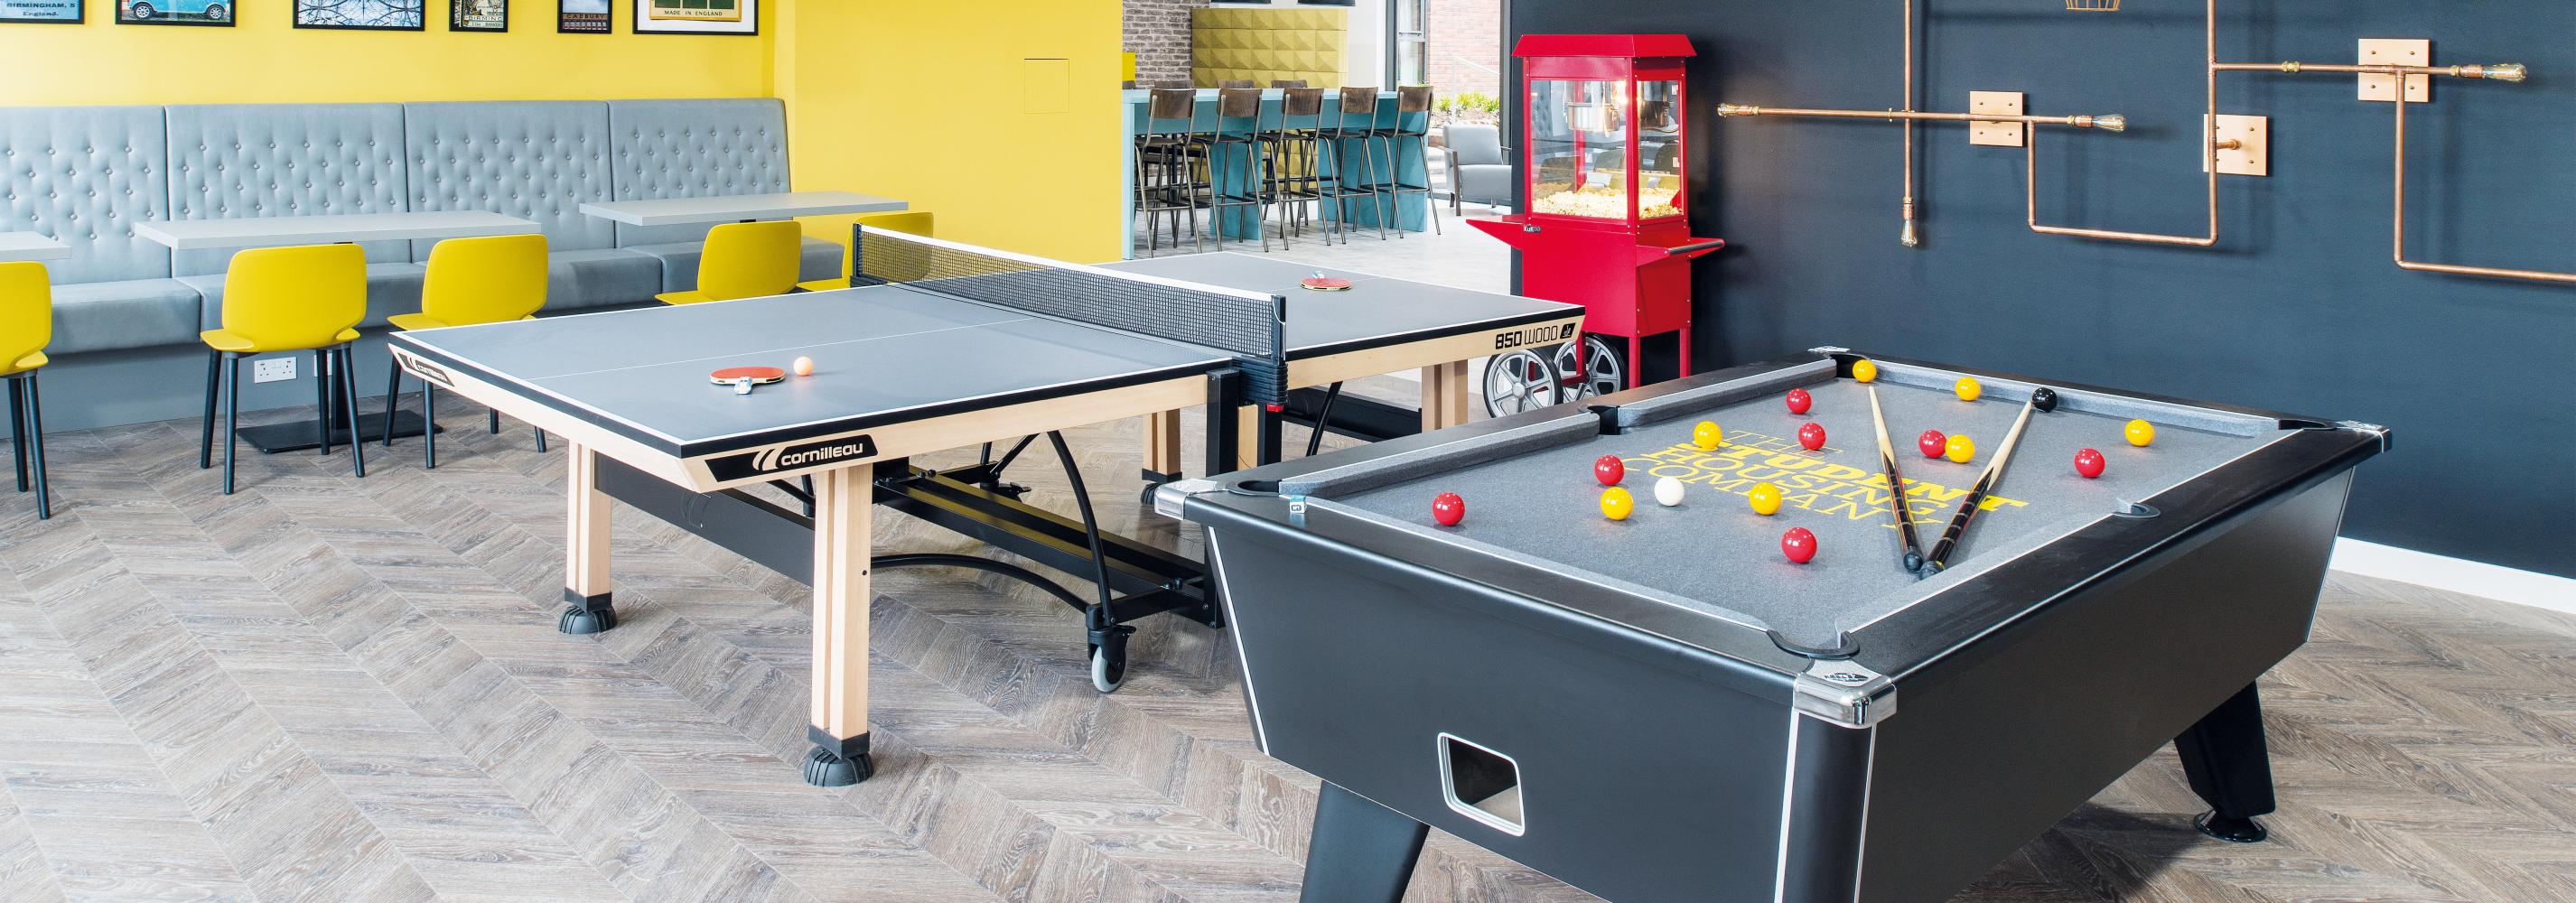 Common Room with Pool table and table tennis table.